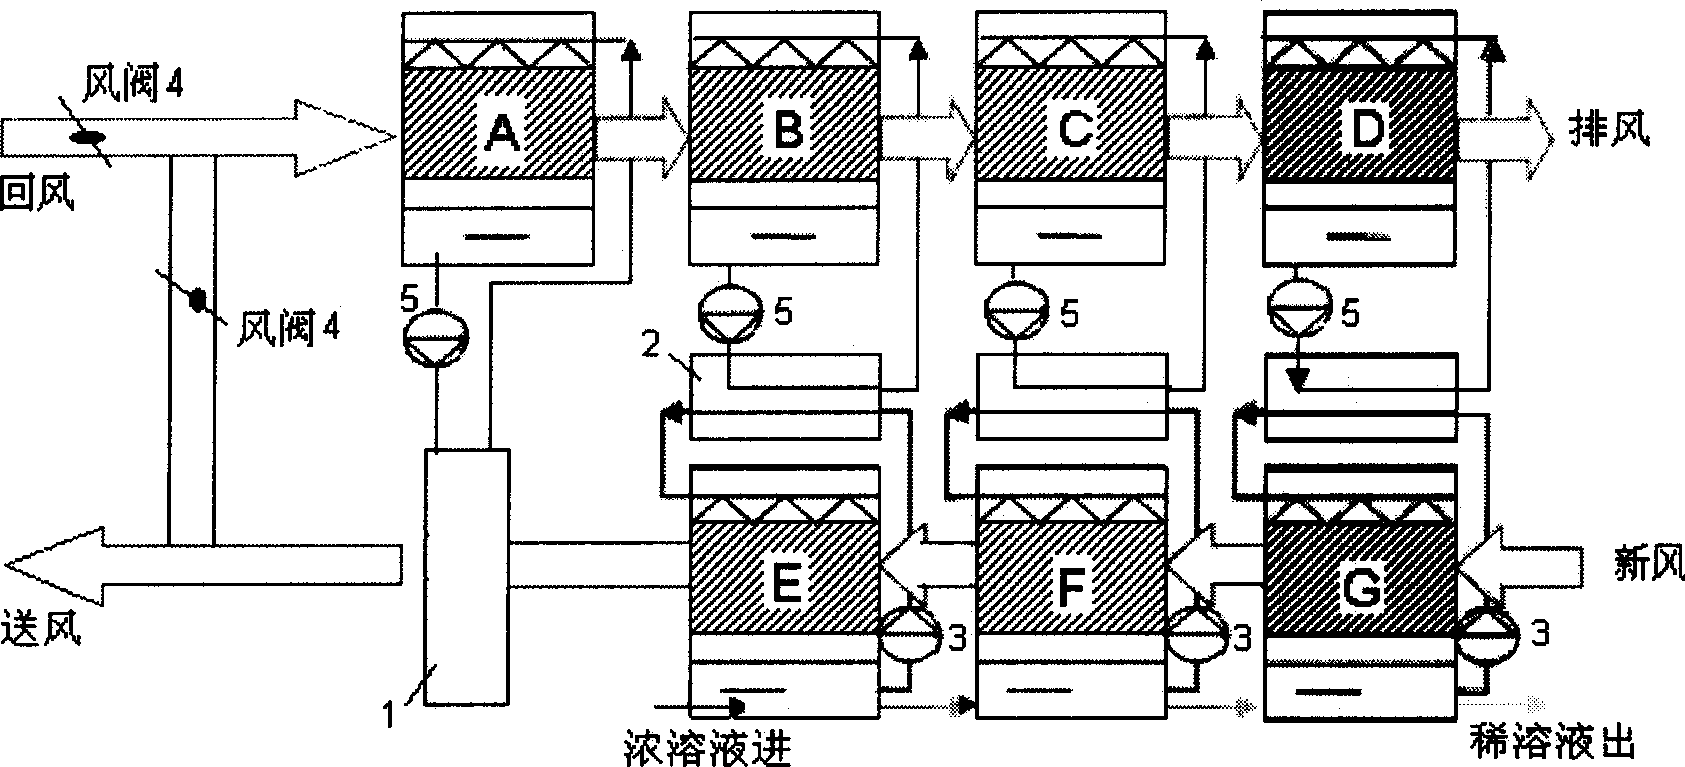 Whole-thermal reclaiming type thermal-drive solution ventilation processor set by using evaporative cooling of return air